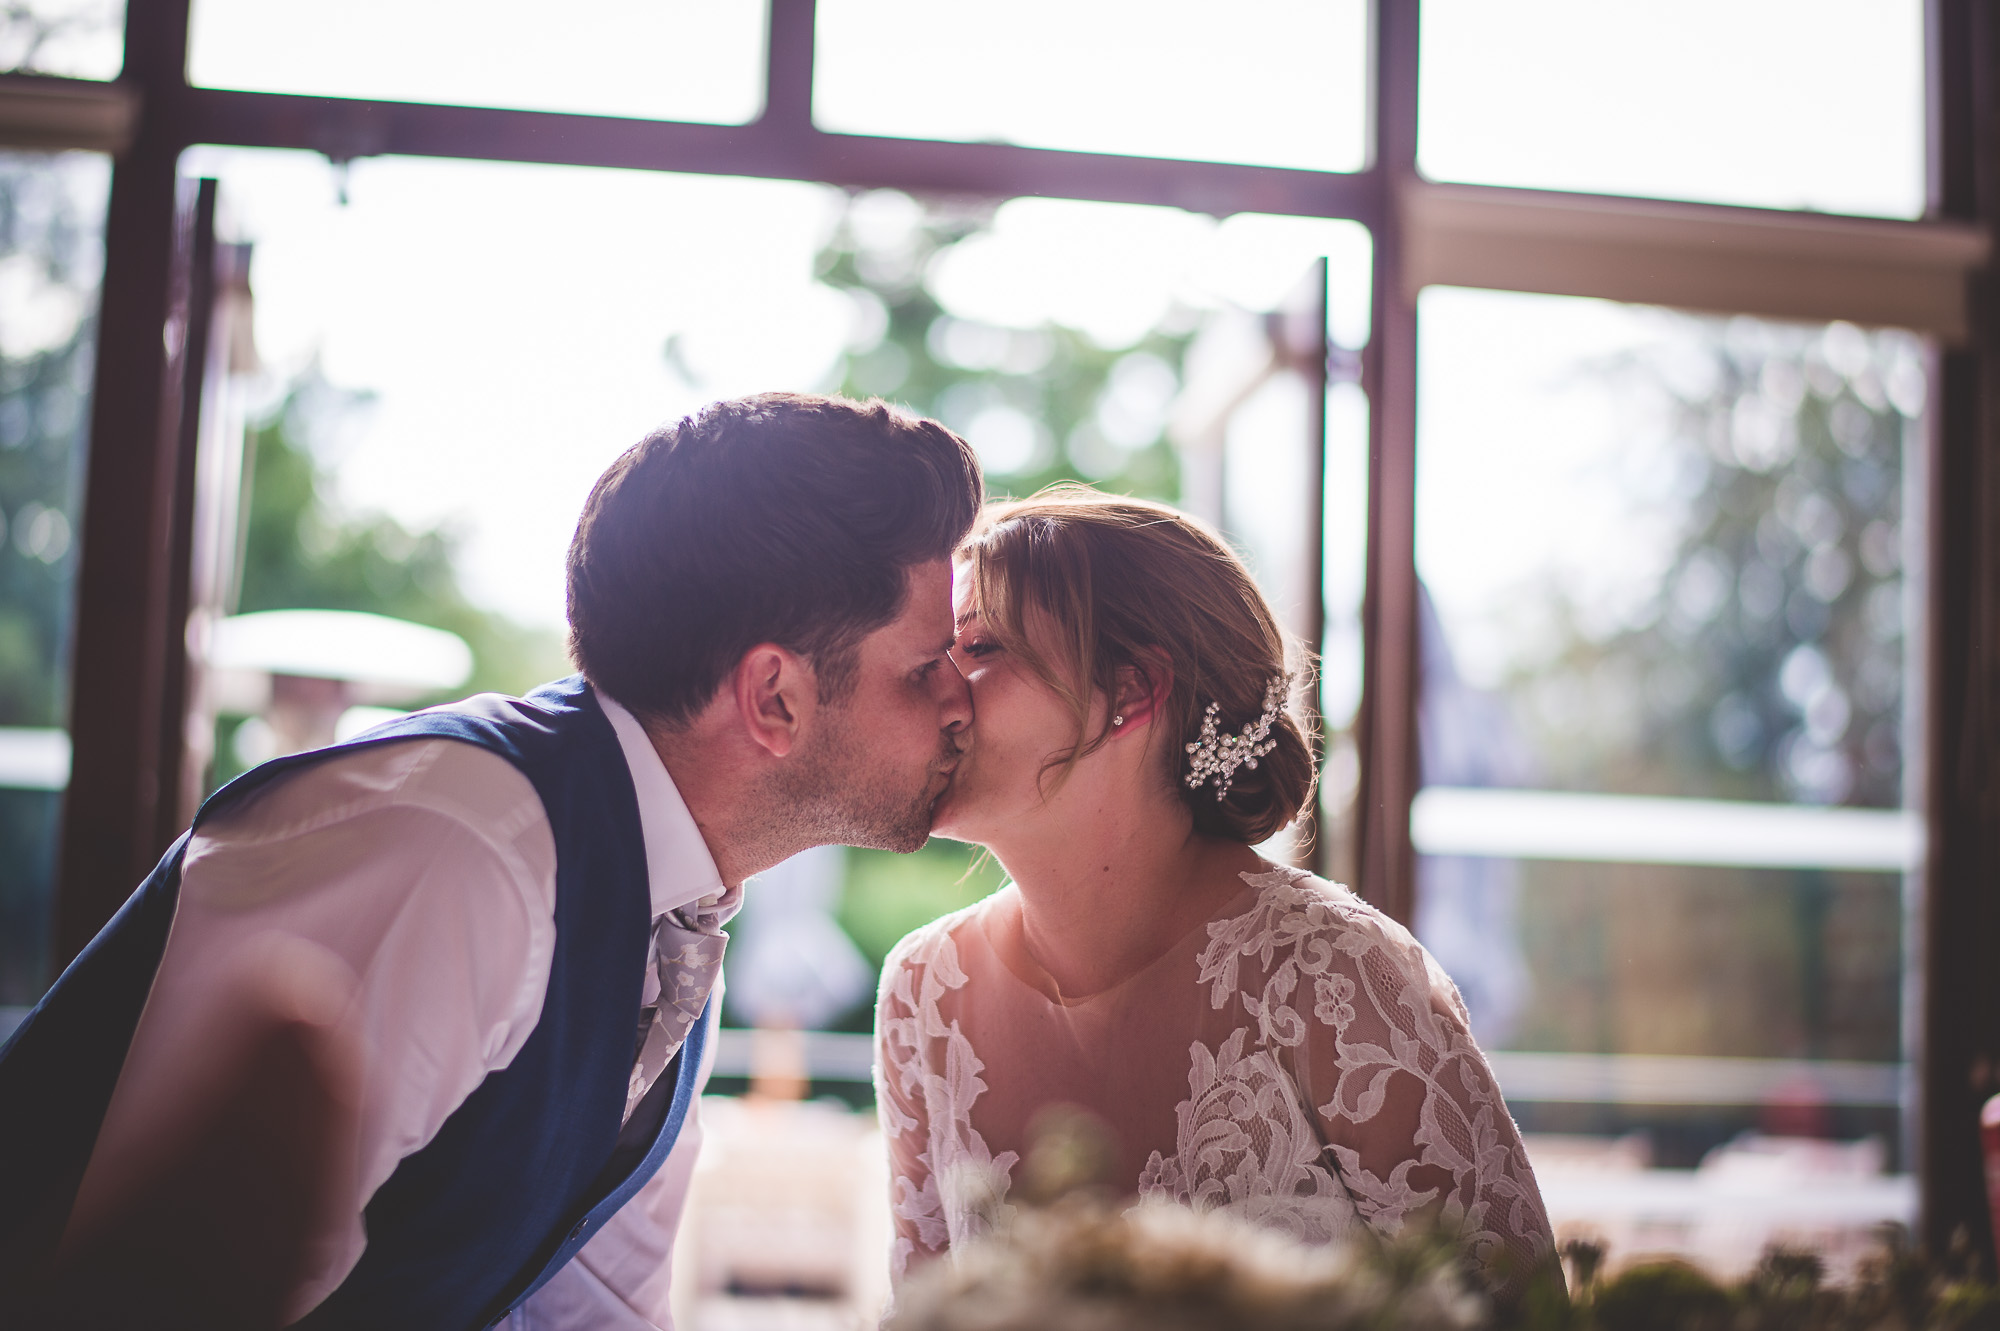 A groom and bride sharing a kiss in front of a wedding window.